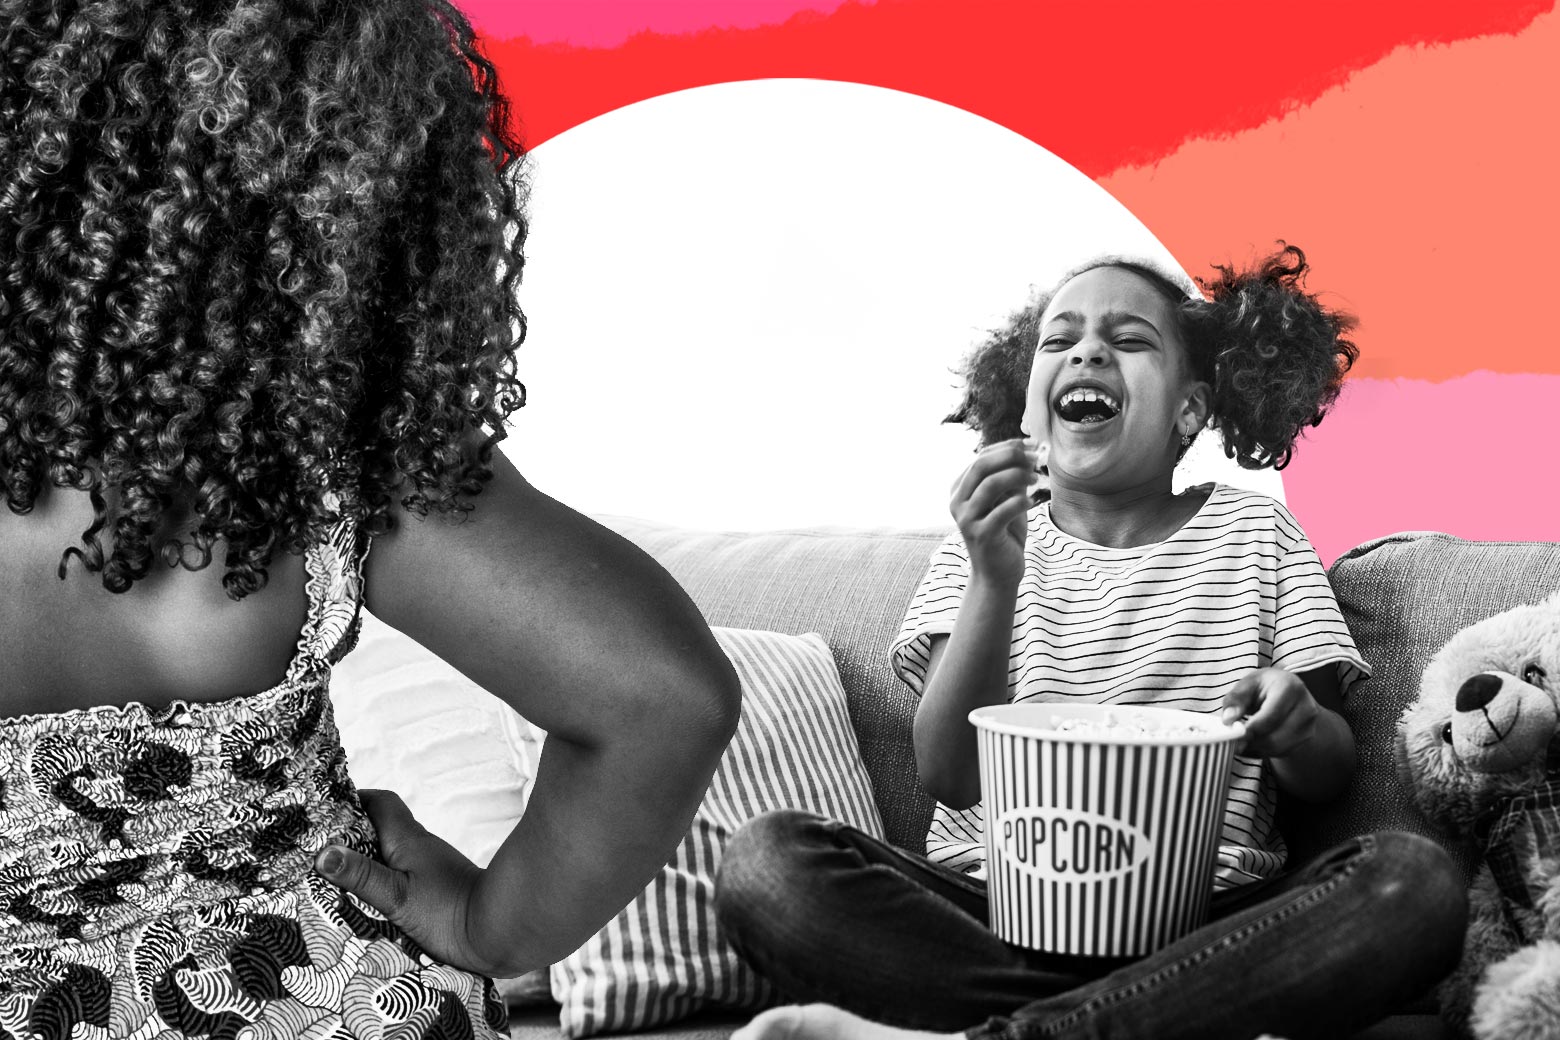 Photo illustration of a girl laughing while eating popcorn on the couch while an older girl looks on disapprovingly.